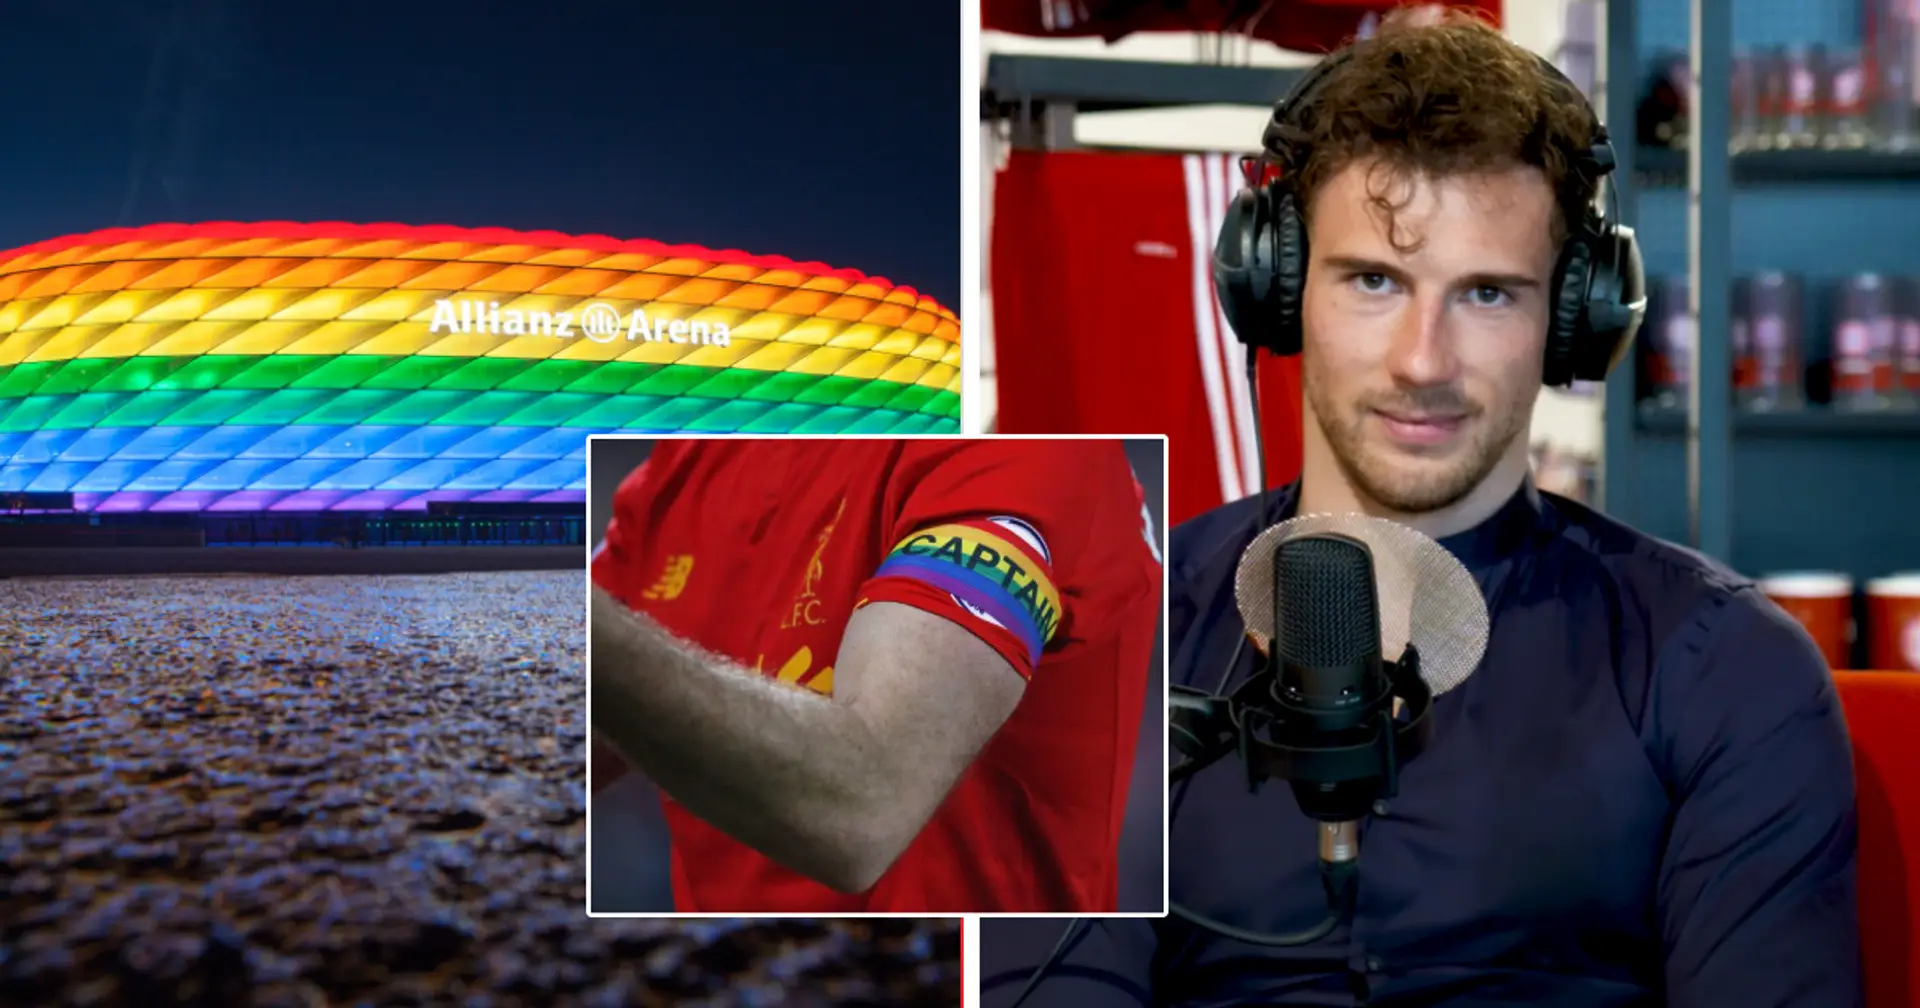 Leon Goretzka: 'I hope some footballer comes out as gay during my career. I'm sure fans will understand'